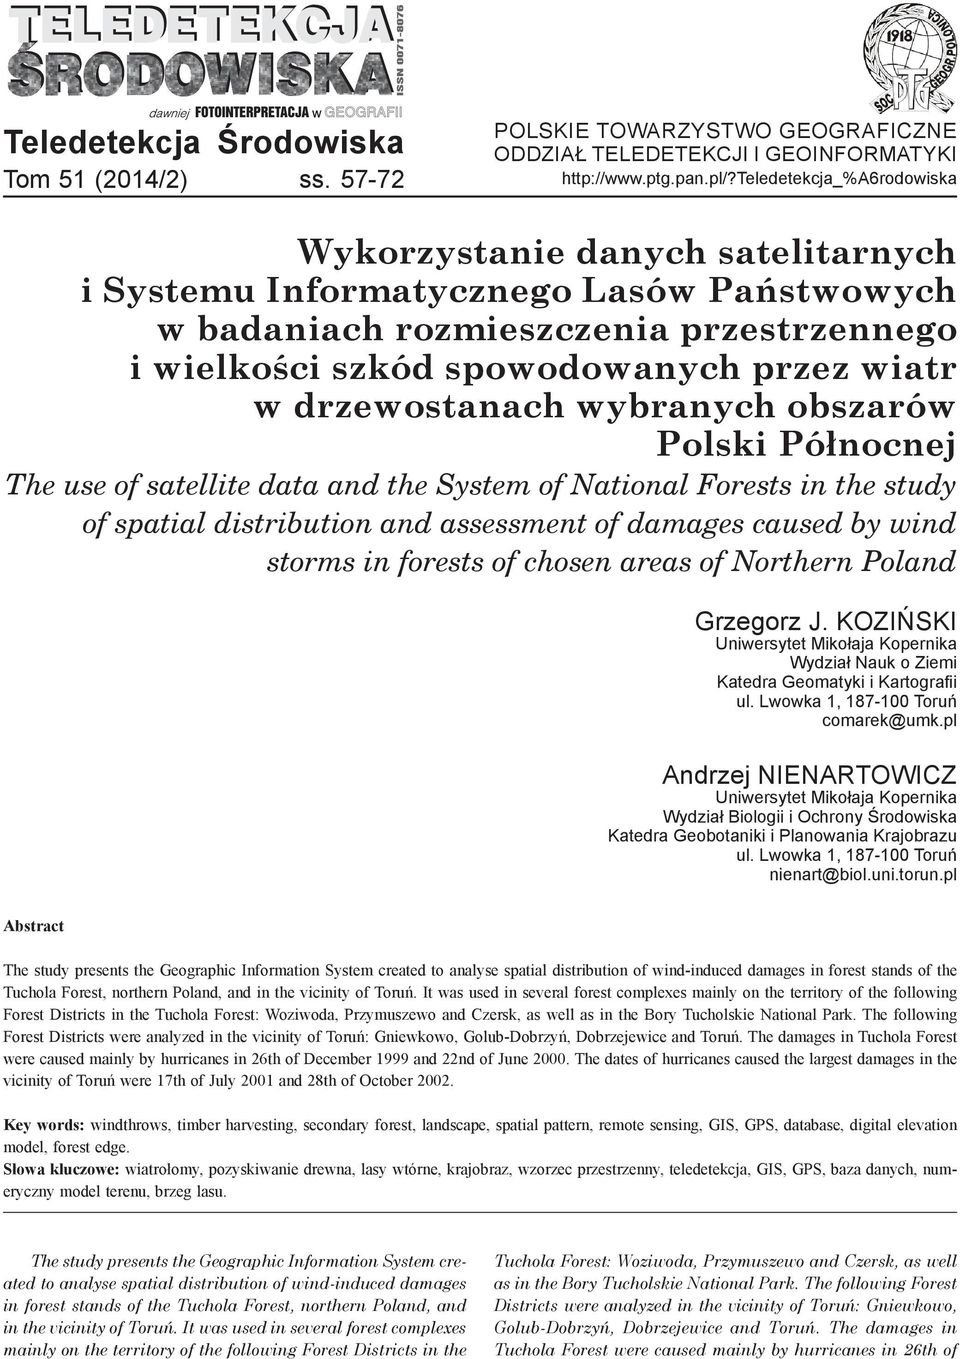 drzewostanach wybranych obszarów Polski Północnej The use of satellite data and the System of National Forests in the study of spatial distribution and assessment of damages caused by wind storms in